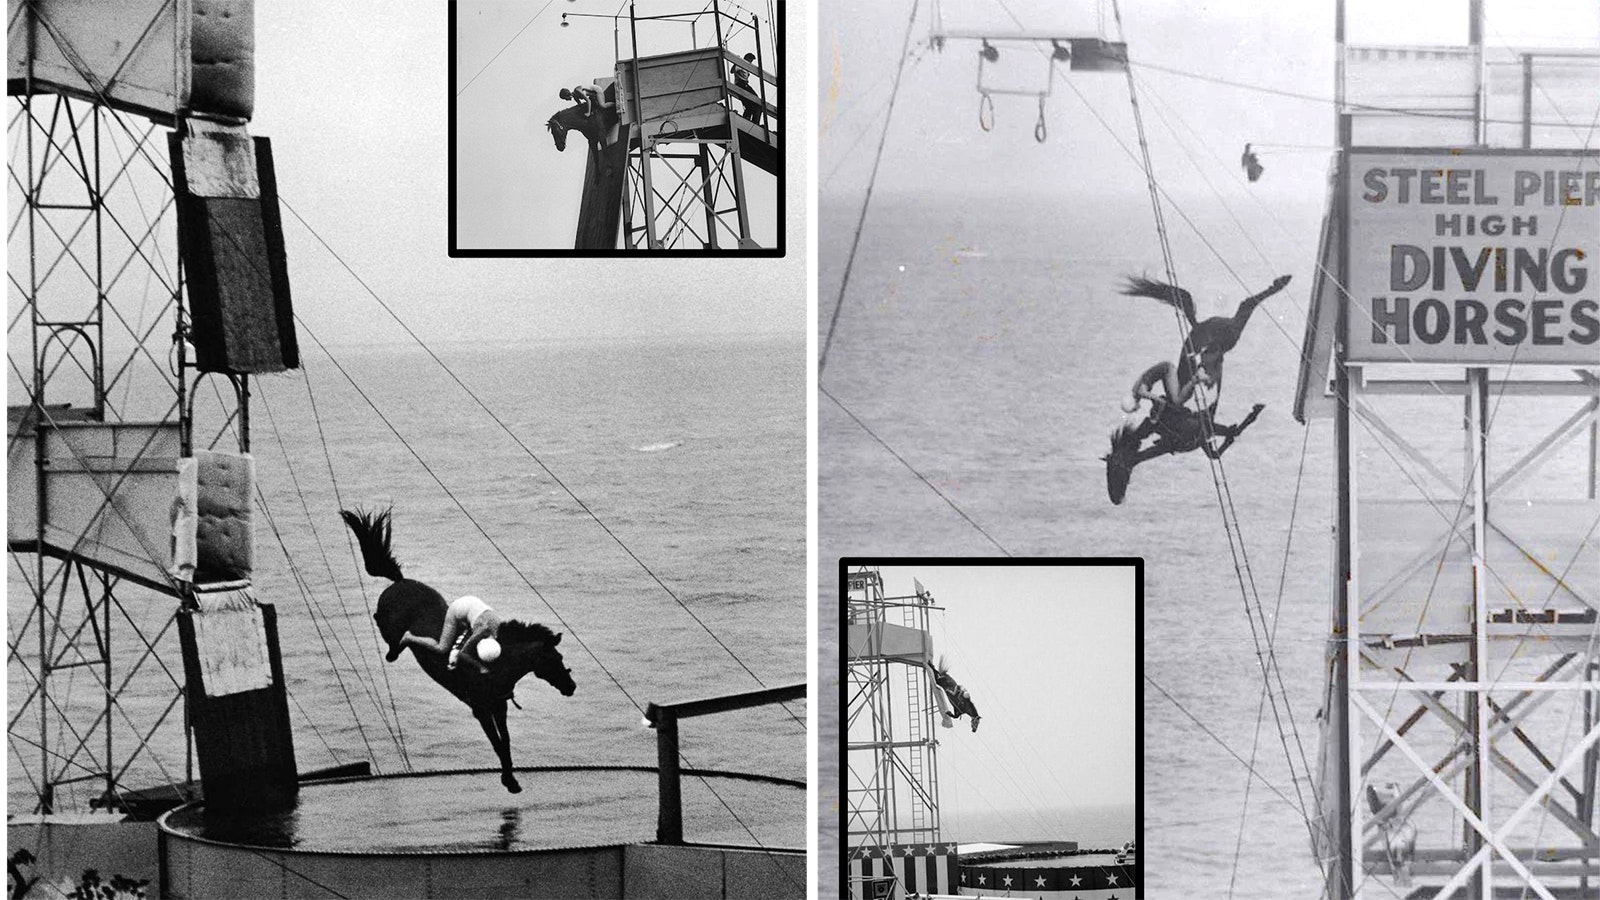 Platforms were as high as 60 feet, twice the height of the highest Olympic diving board.